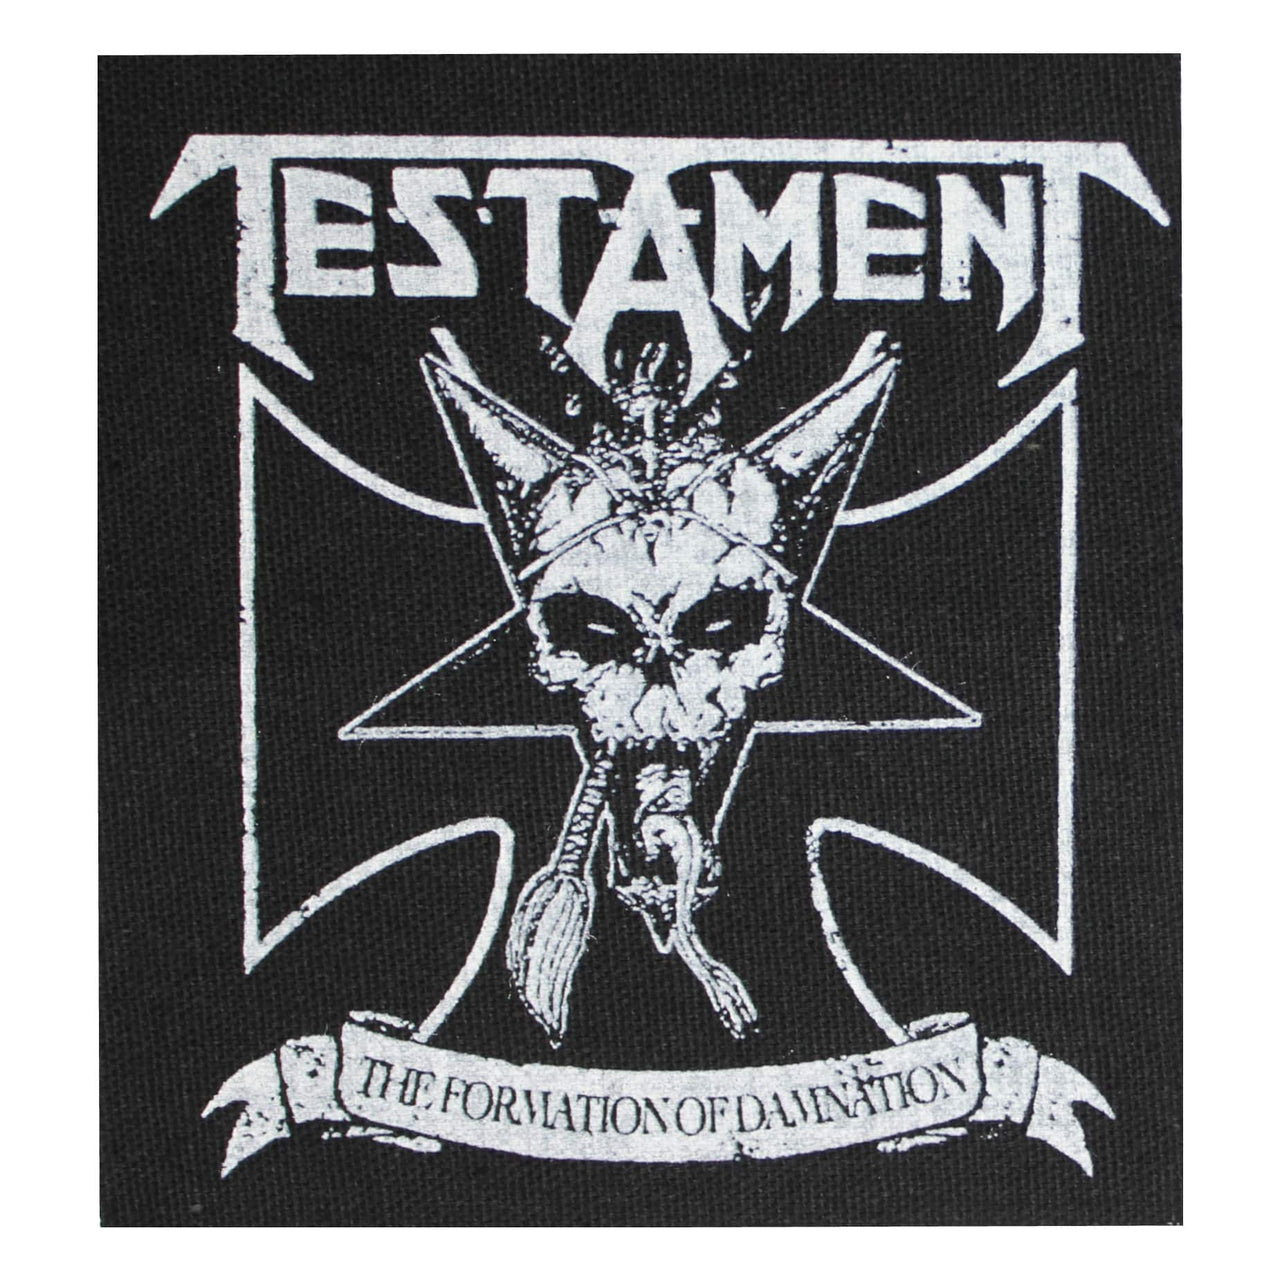 Testament The Formation of Damnation Cloth Patch